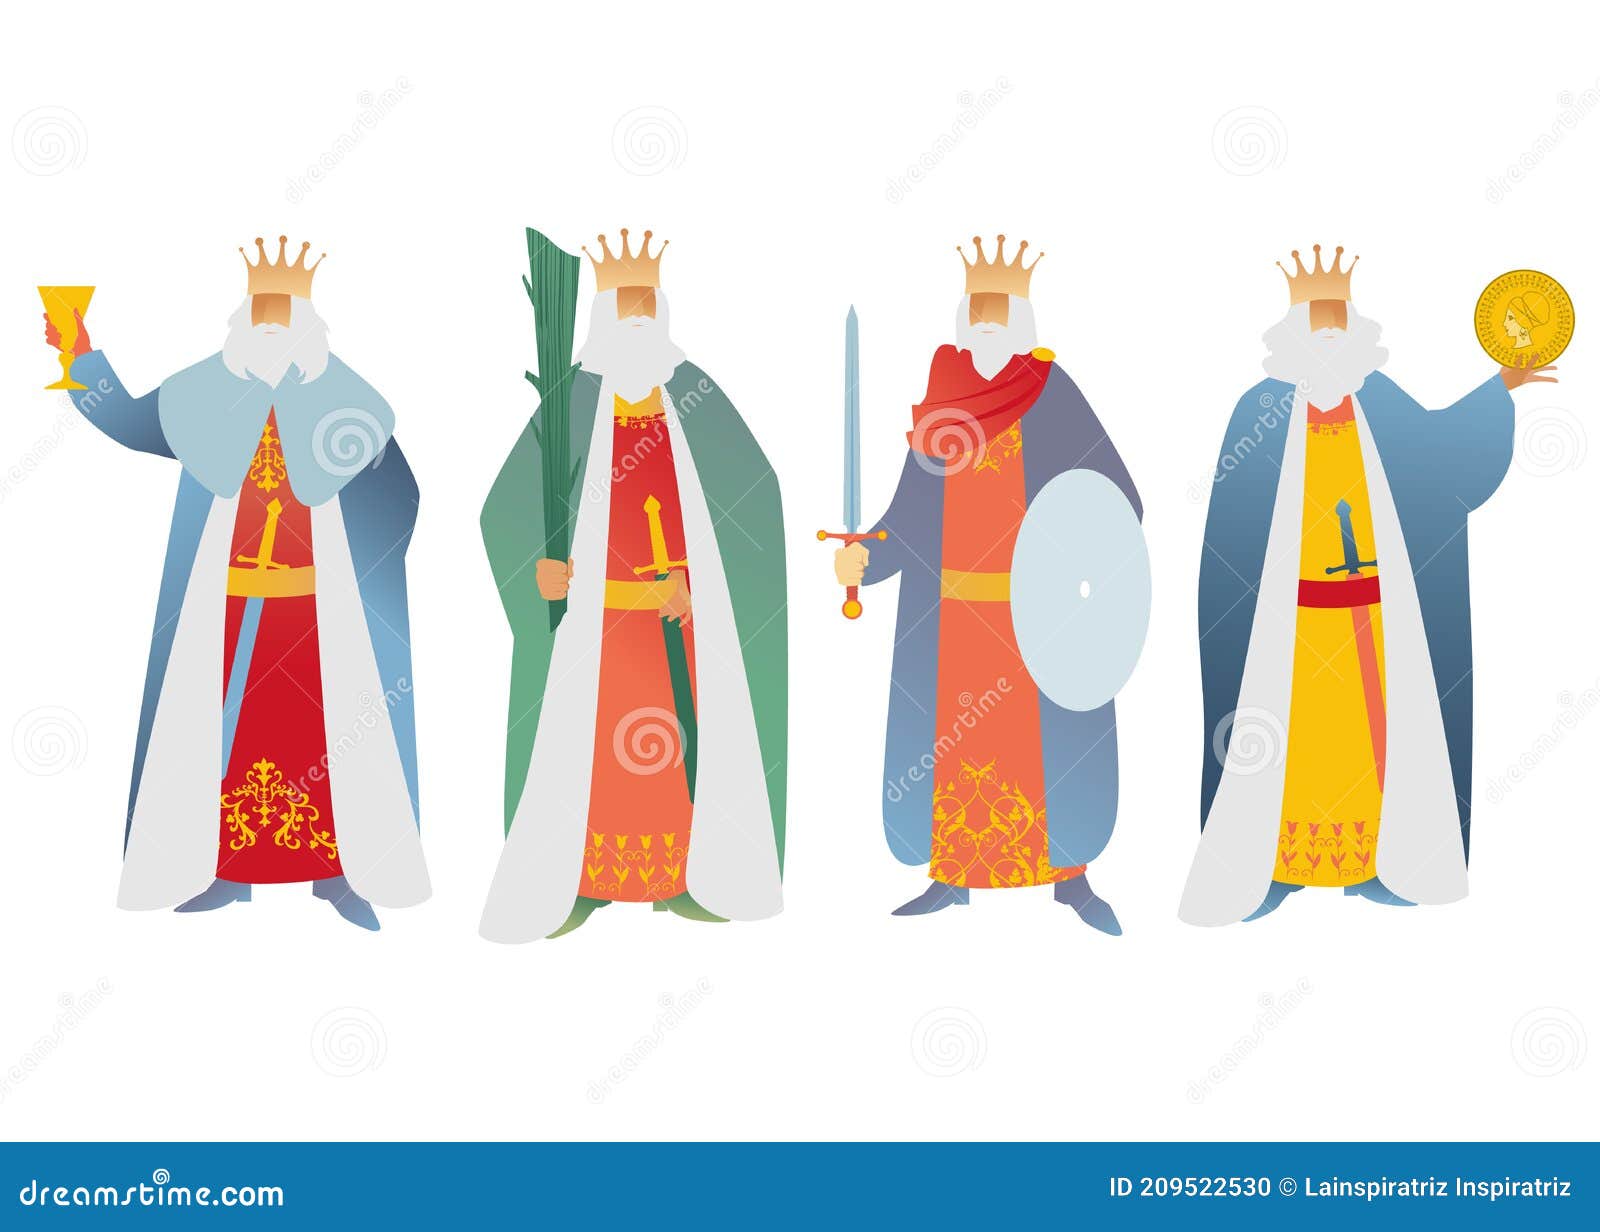 four kings dressed in ancient clothes, carrying rods, cups, golds, swords and shields. playing card figures